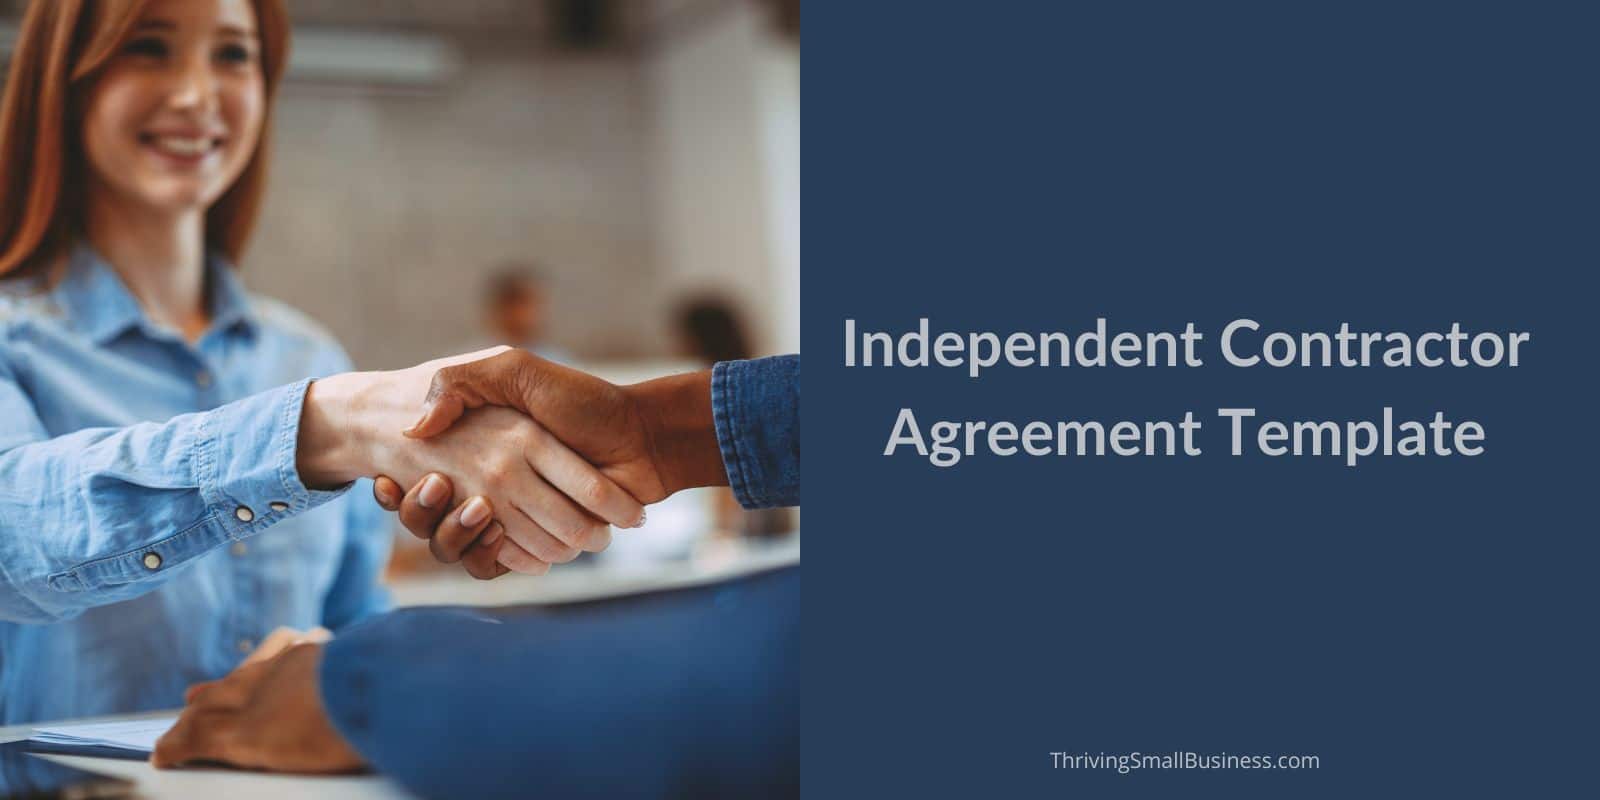 free independent contractor agreement template